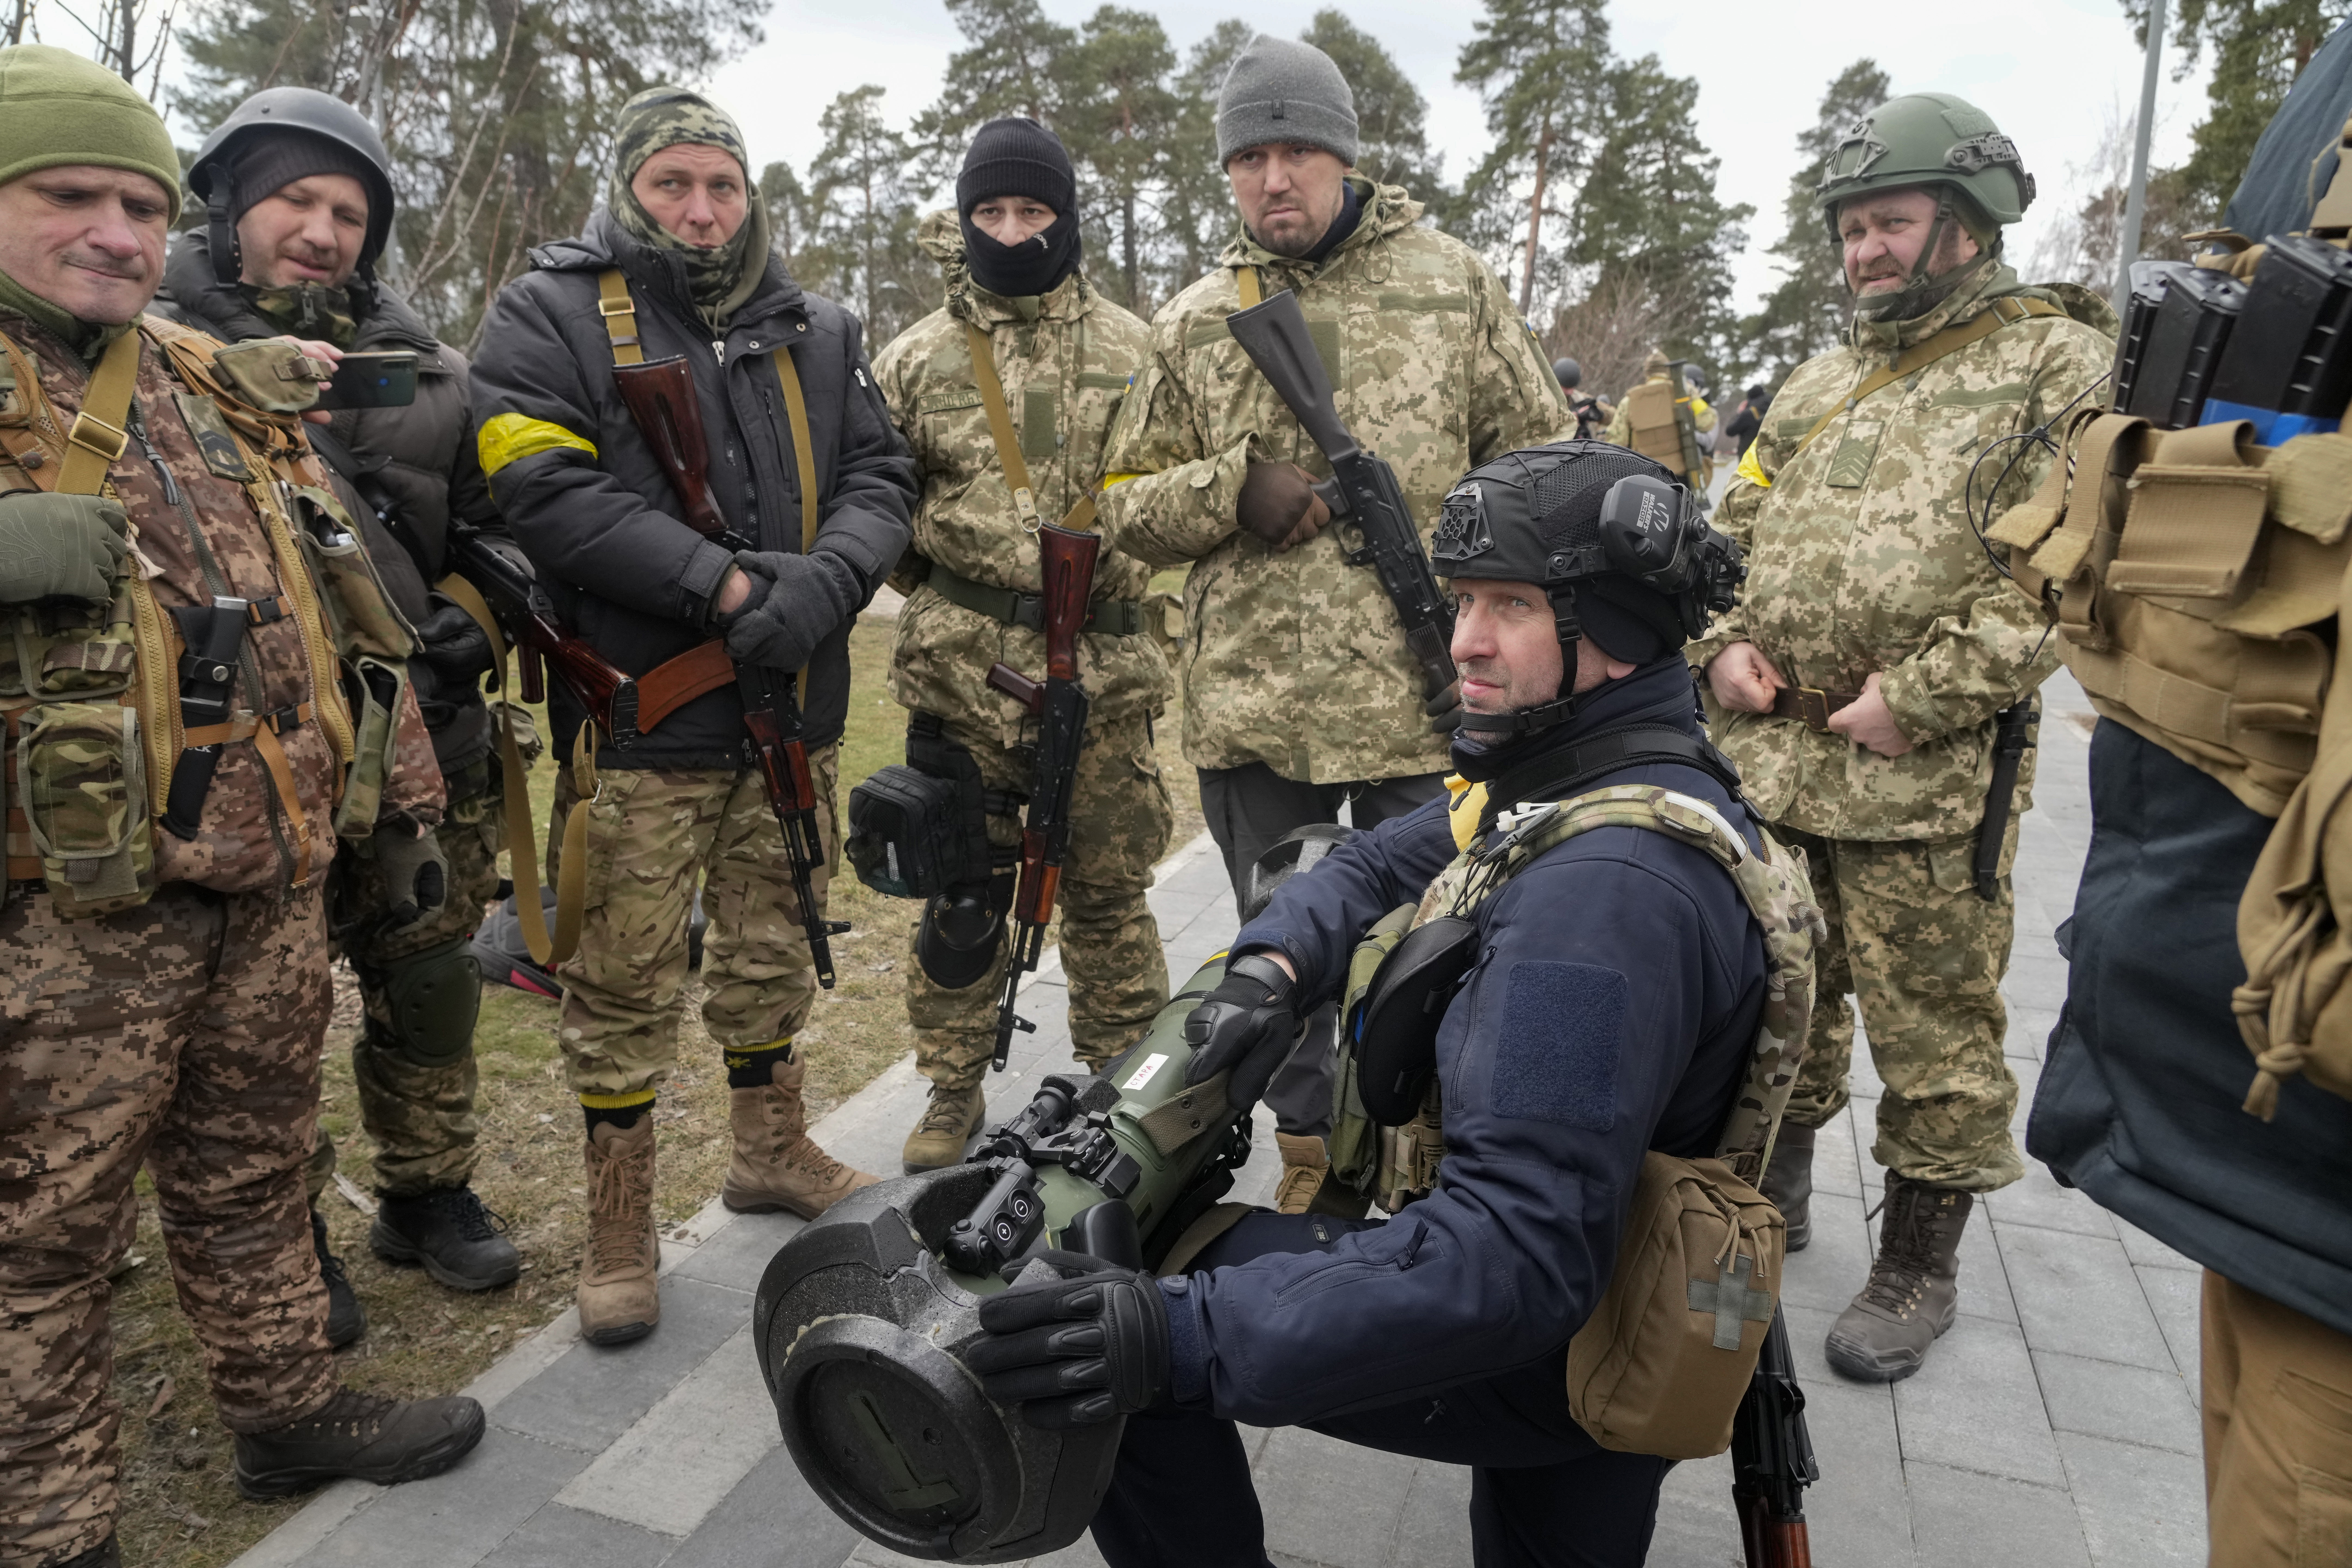 Ukrainian Territorial Defence Forces members train to use an NLAW anti-tank weapon in the city park in Kyiv outskirts, Ukraine, Wednesday, March 9, 2022 